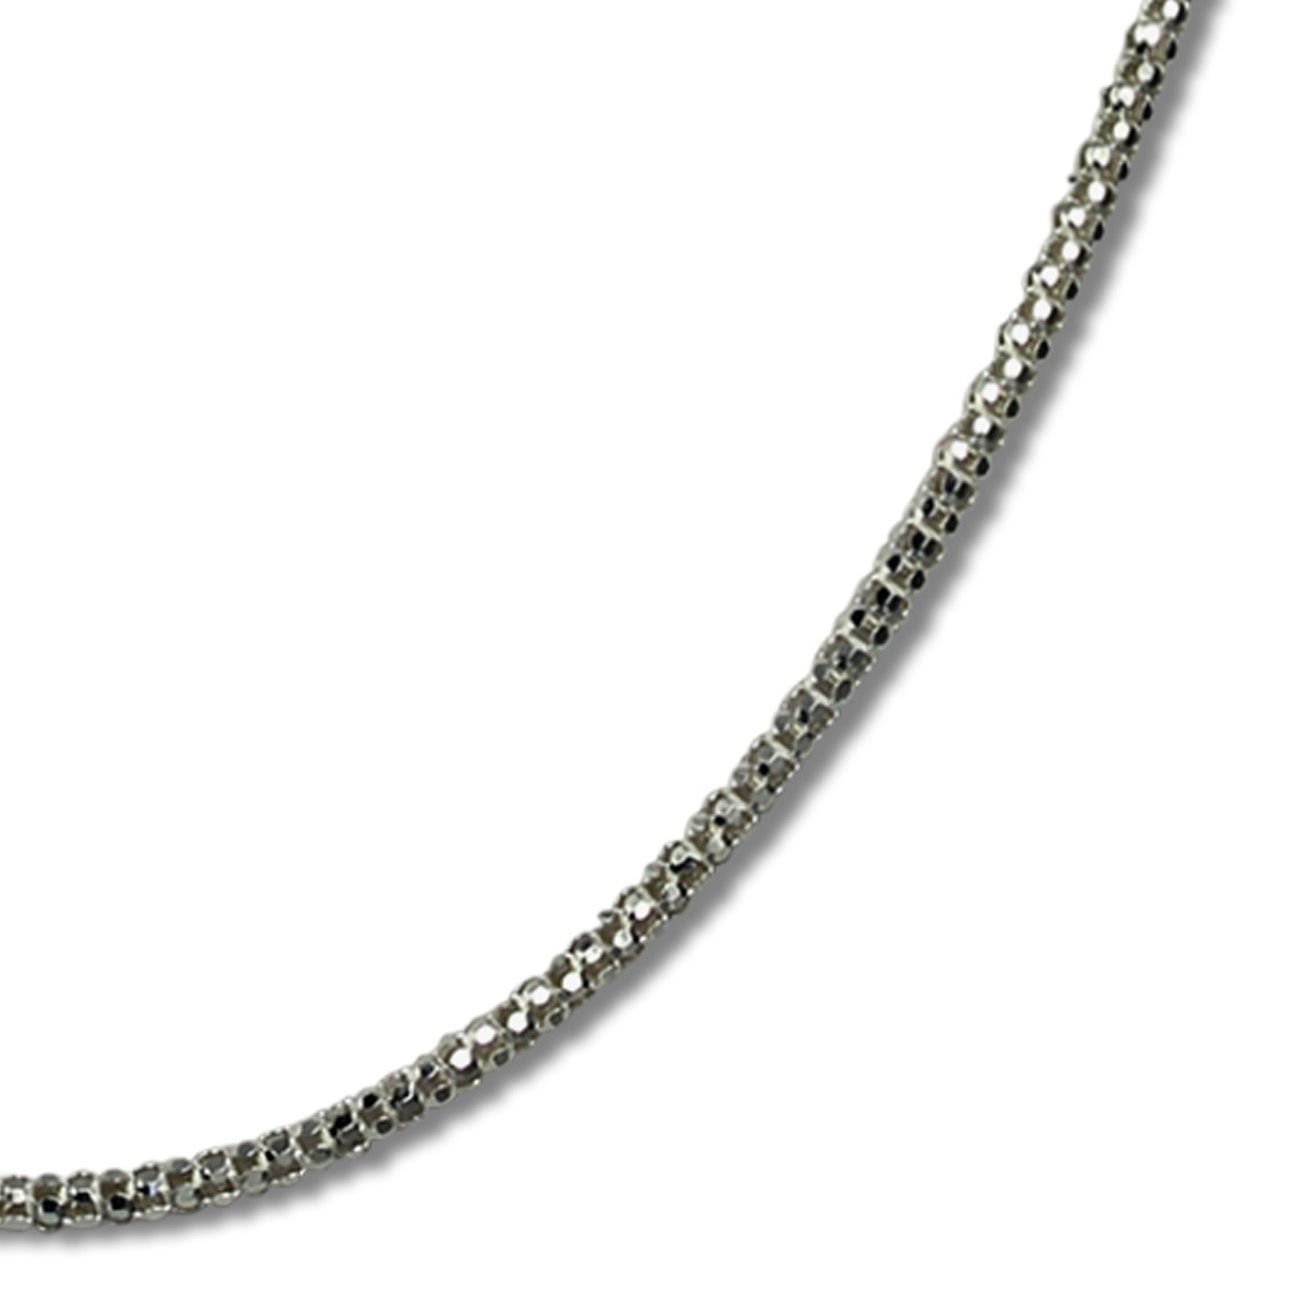 SilberDream Collier Germany Farbe: Silber, Schmuck 925 SilberDream 45cm, silber 45cm, silber, Collier Colliers Sterling Made-In ca.